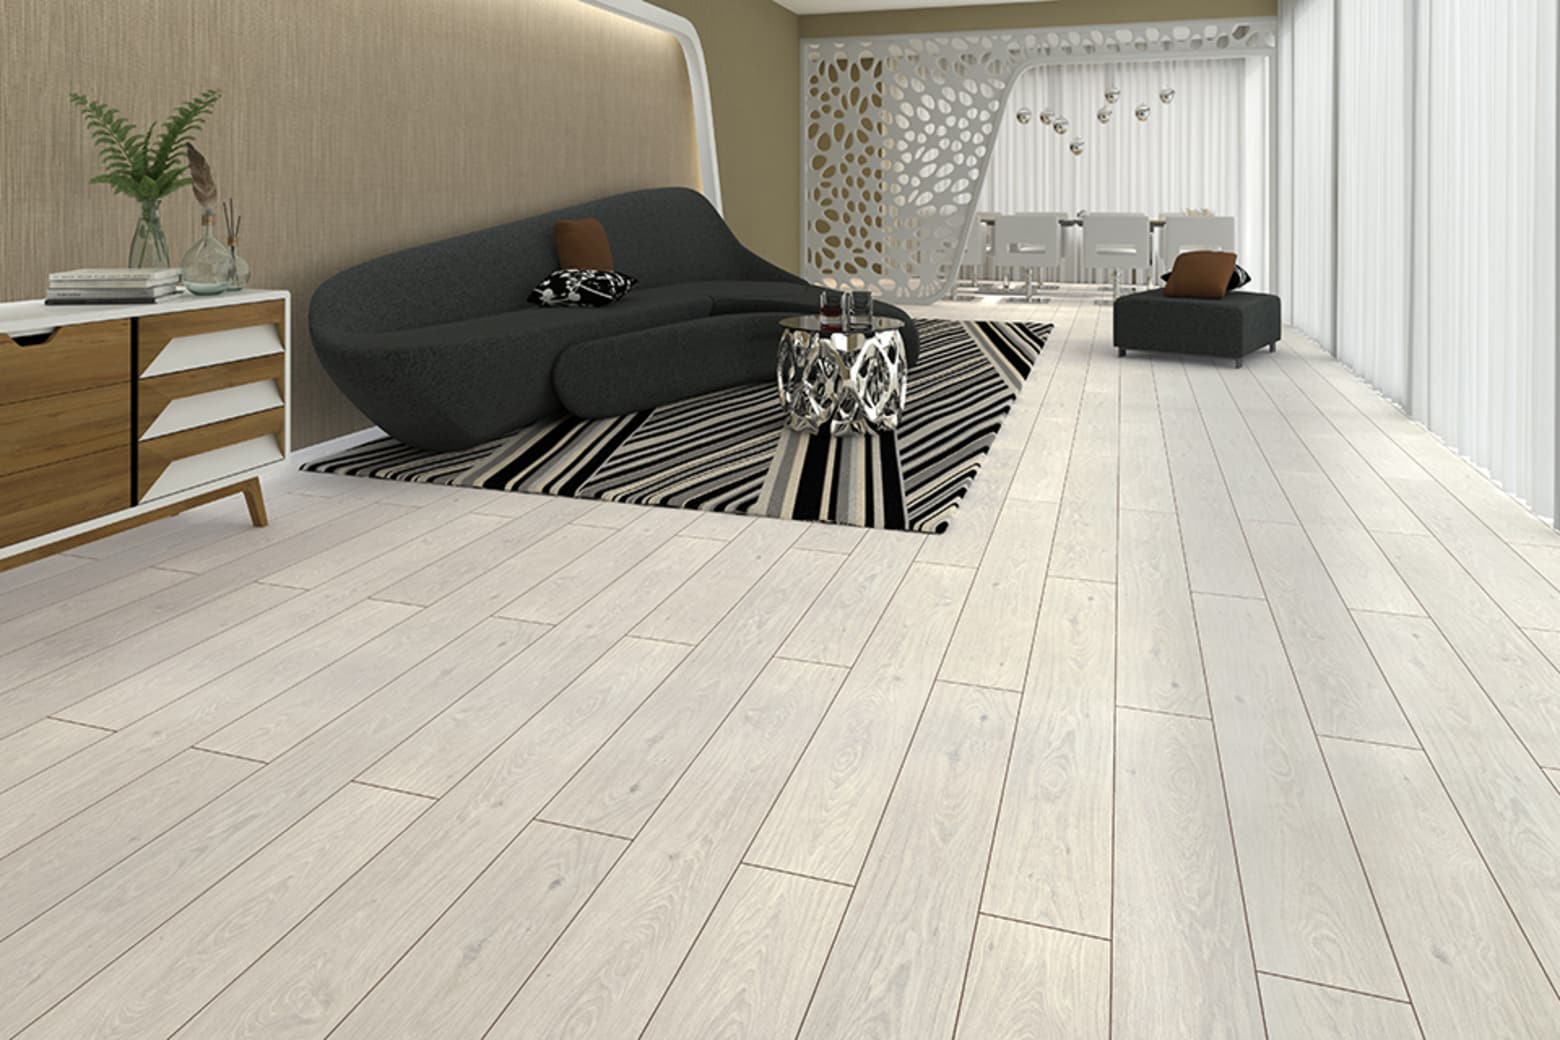 North Light Snow White Oak Laminate Flooring 8mm By 193mm By